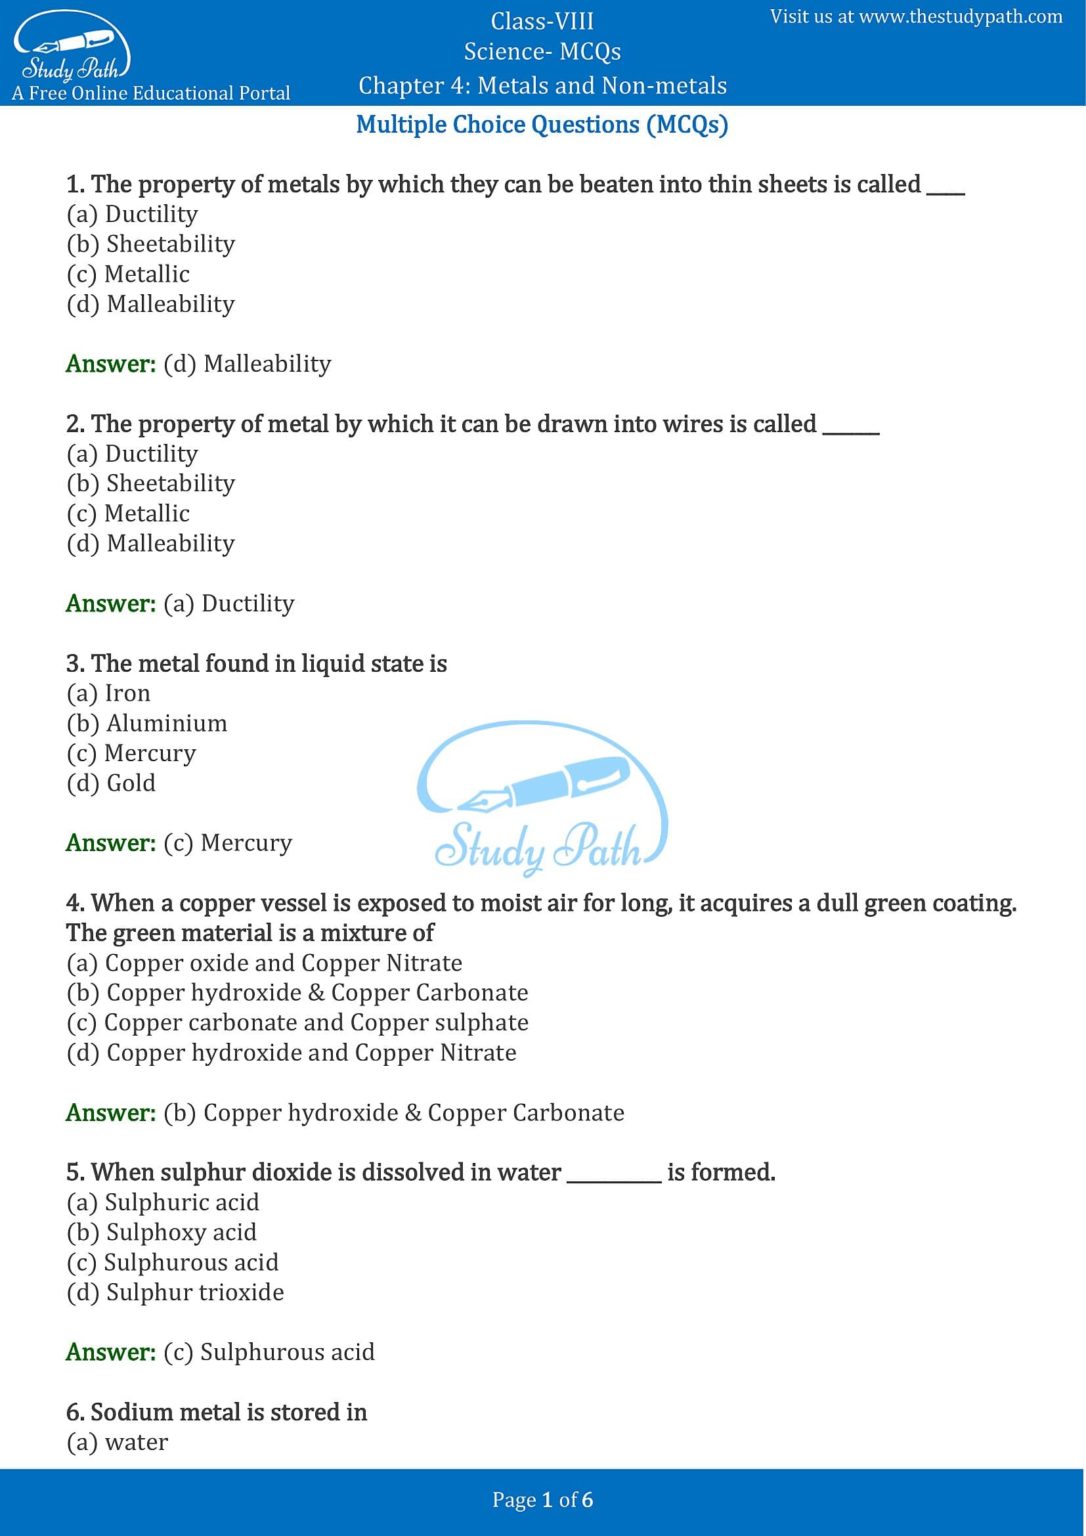 class 8 science case study questions pdf